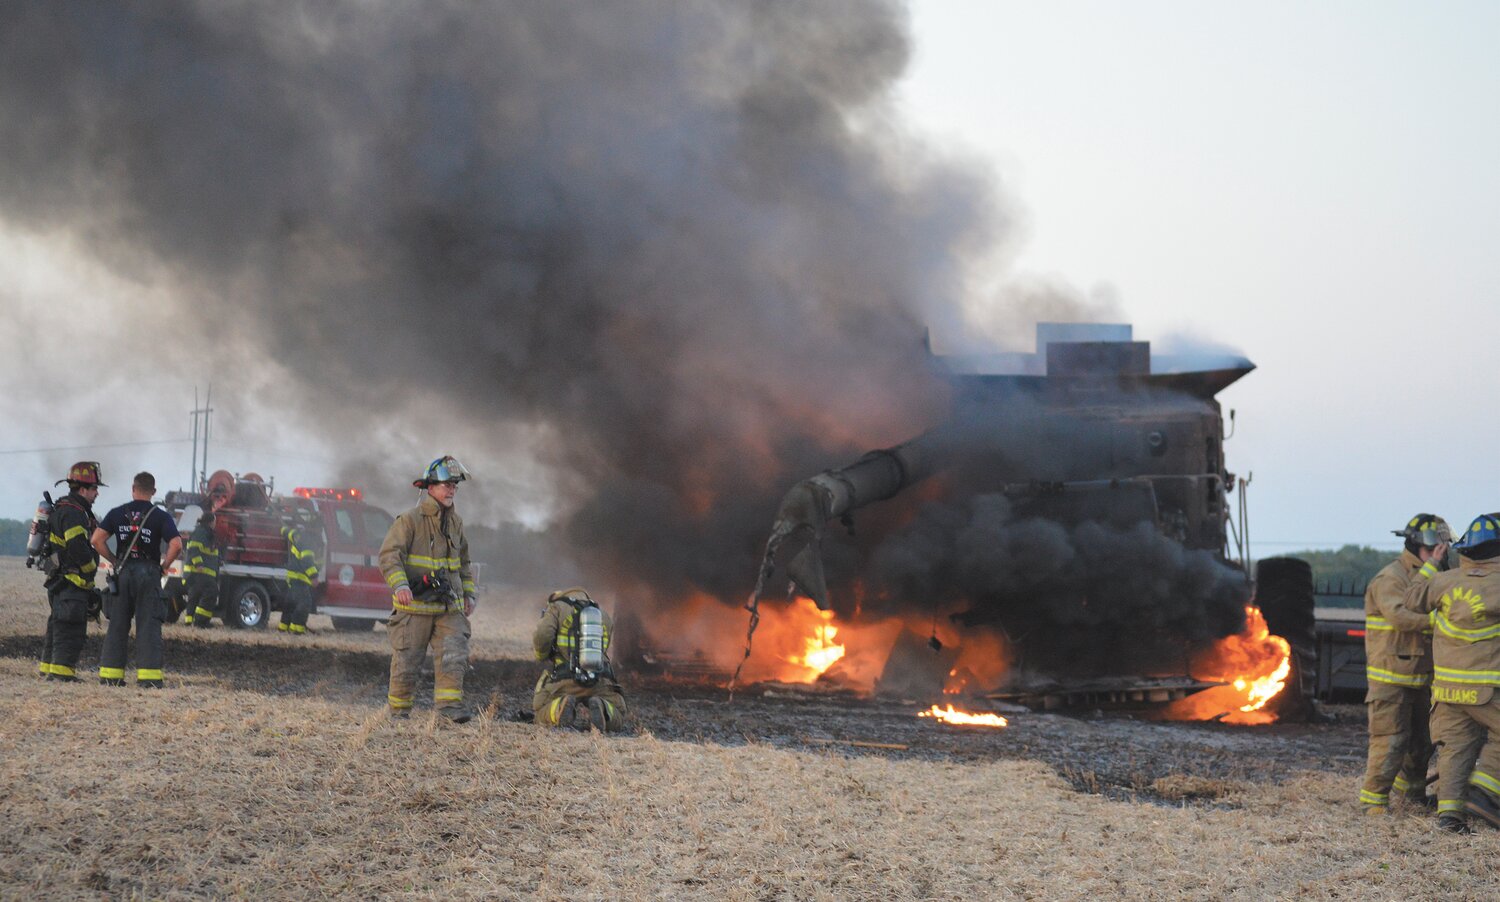 Firefighters from Crawfordsville and New Market responded shortly after 7 p.m. Sunday to a report of a combine on fire at 1434 E. C.R. 600S. Thick black smoke could be seen from miles away. The first unit on the scene reported the combine was fully engulfed in fire. Brush trucks were used to shuttle water to the fire because the combine was located quite a distance from the road. The combine, owned by Tom Boots, was destroyed.